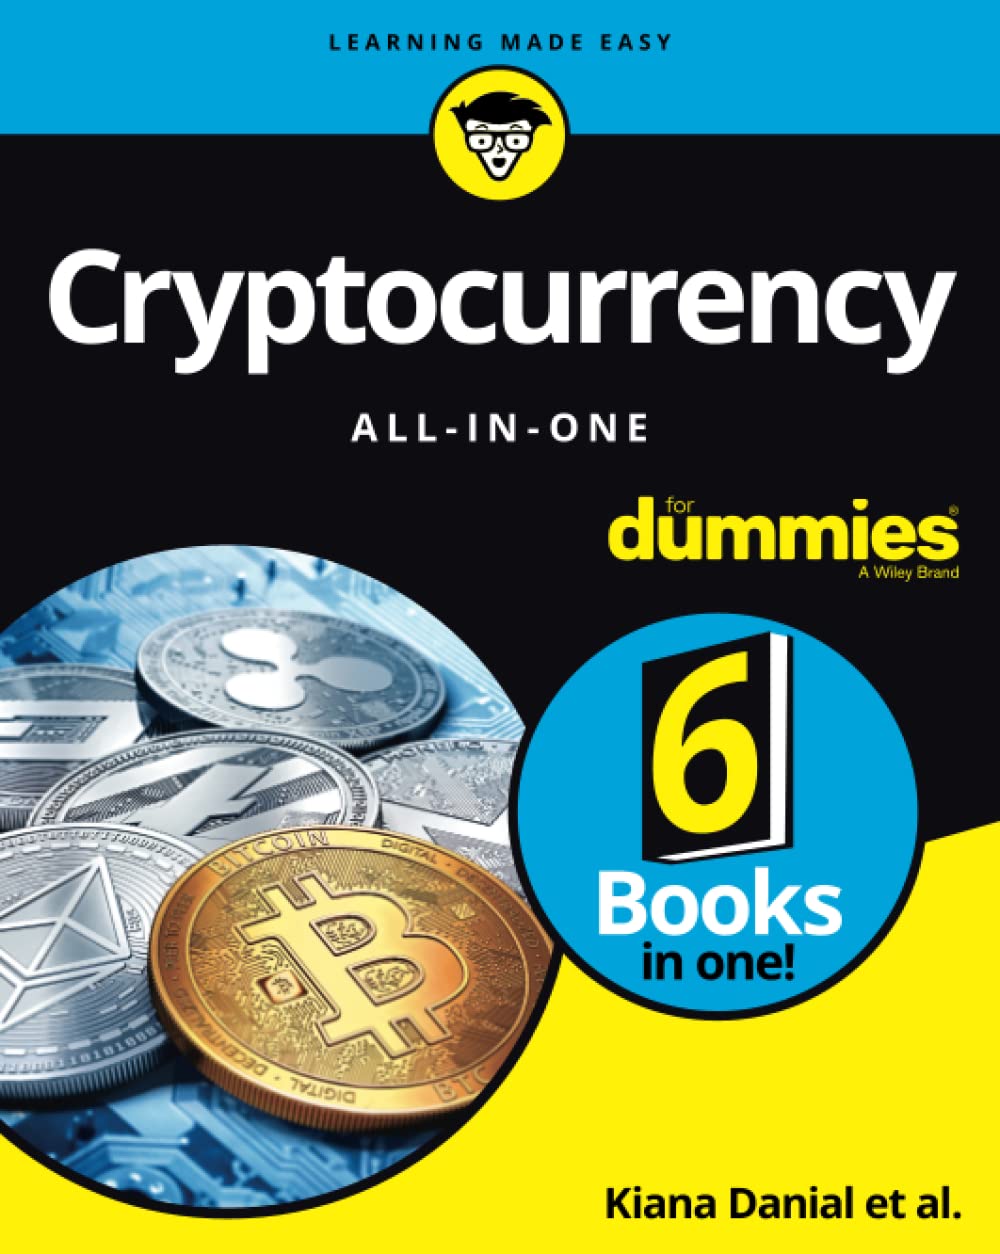 Cryptocurrency All-in-One For Dummies | Kiana Danial, Tiana Laurence, Peter Kent, Tyler Bain, Michael G. Solomon